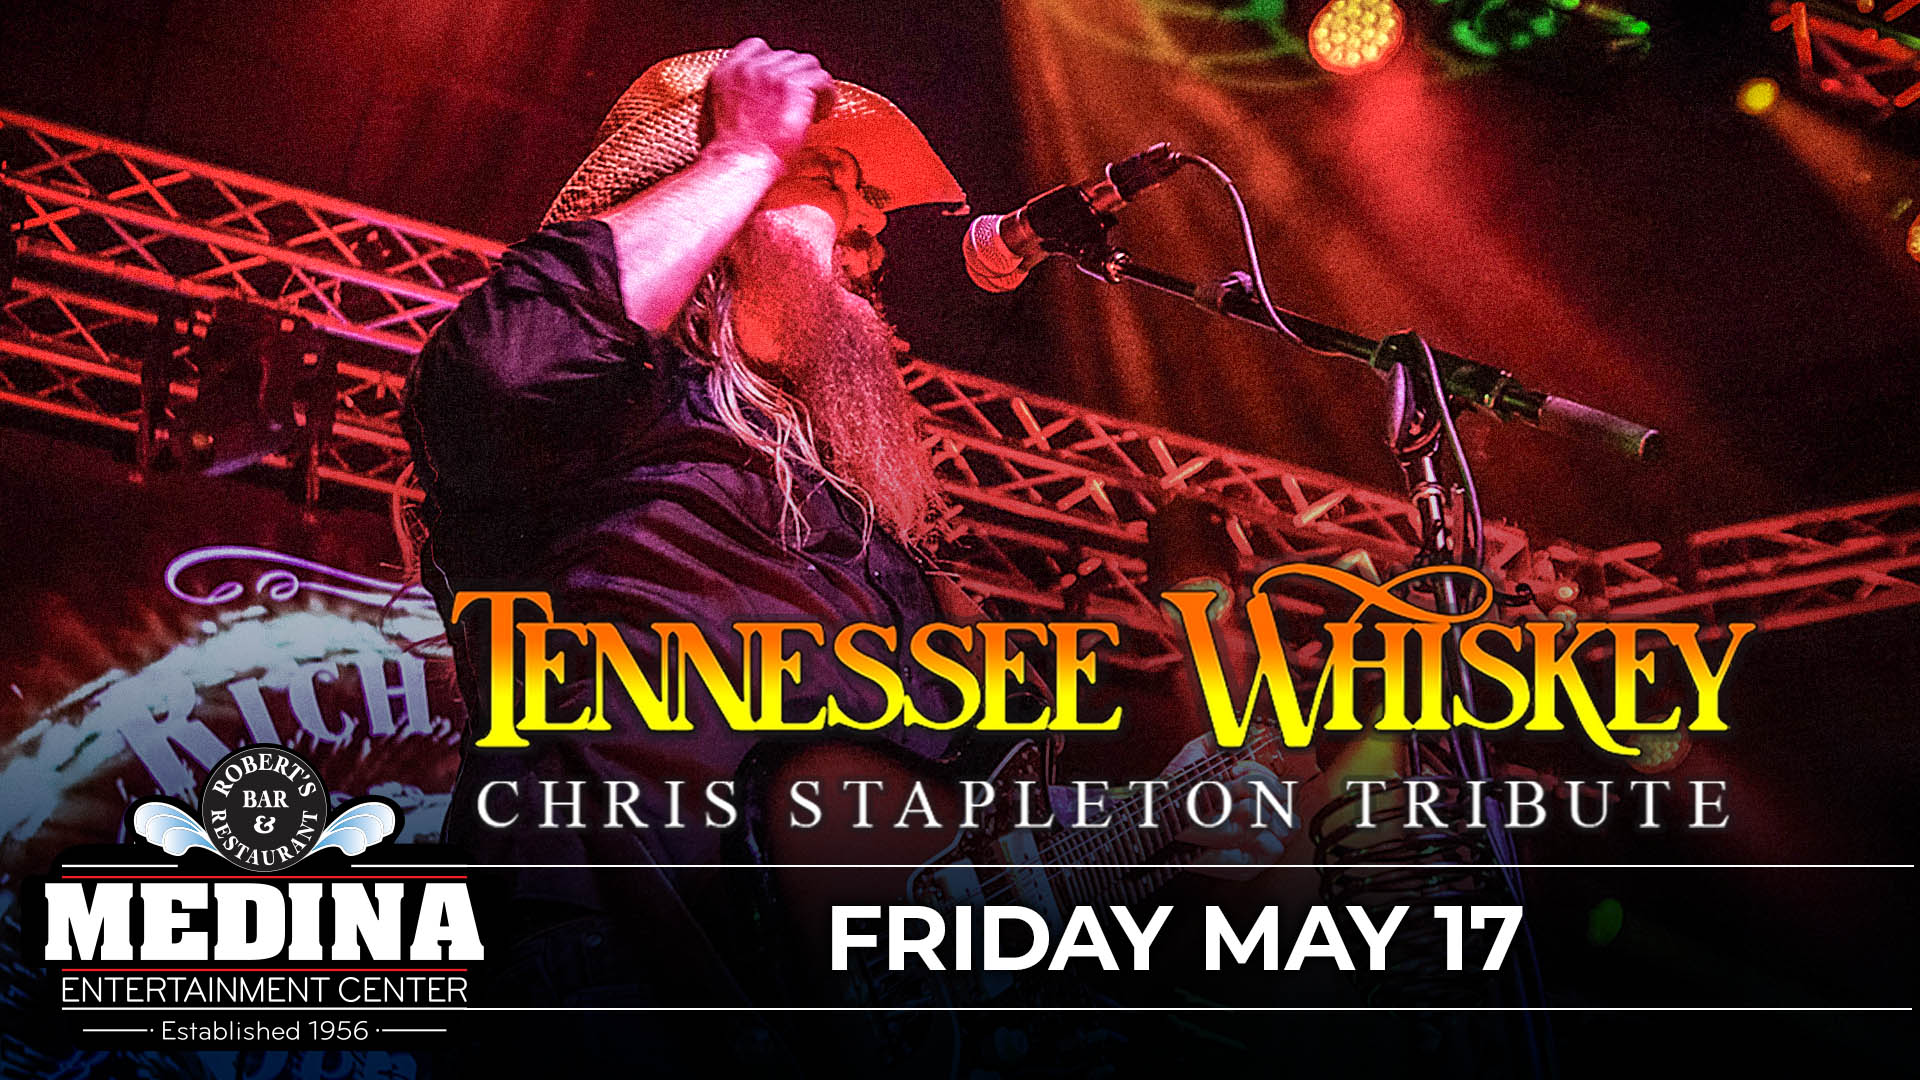 Tennessee Whiskey Chris Stapleton Tribute Medina Entertainment Center Friday, May 17, 2024 Doors: 7:00PM | Music: 8:00PM | 21+ Tickets on-sale Friday, March 22 at 11AM Gold Reserved $35 / Silver Reserved $30 / General Seating $23 plus applicable fees